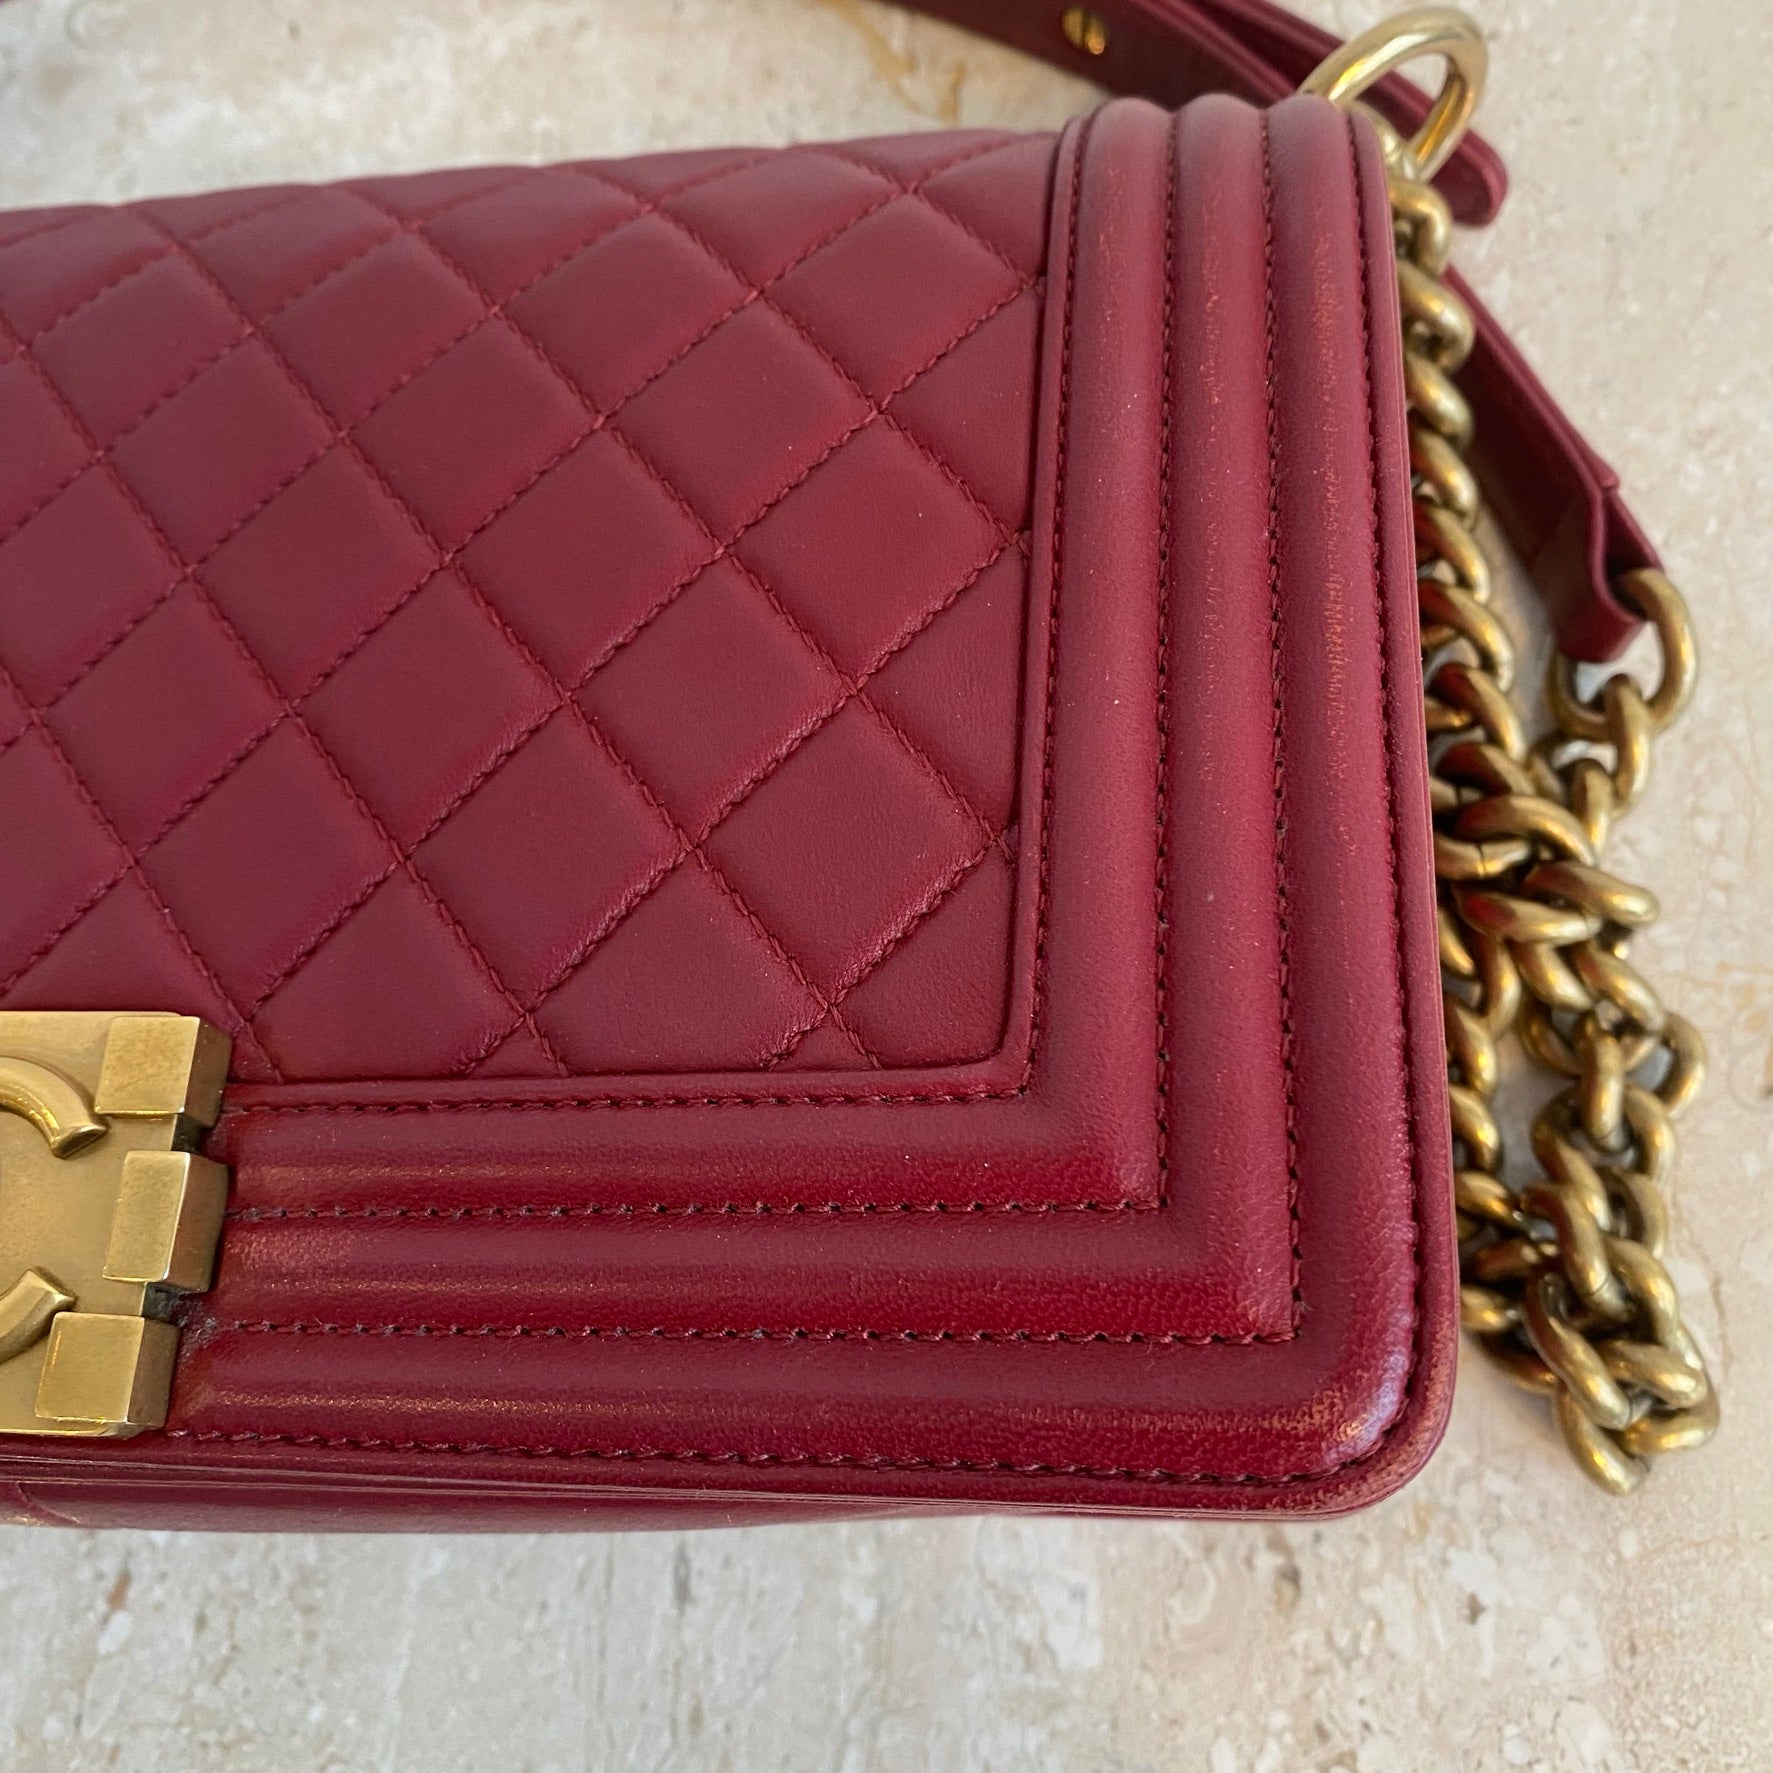 Pre-Owned CHANEL Old Medium Red Boy Bag GHW